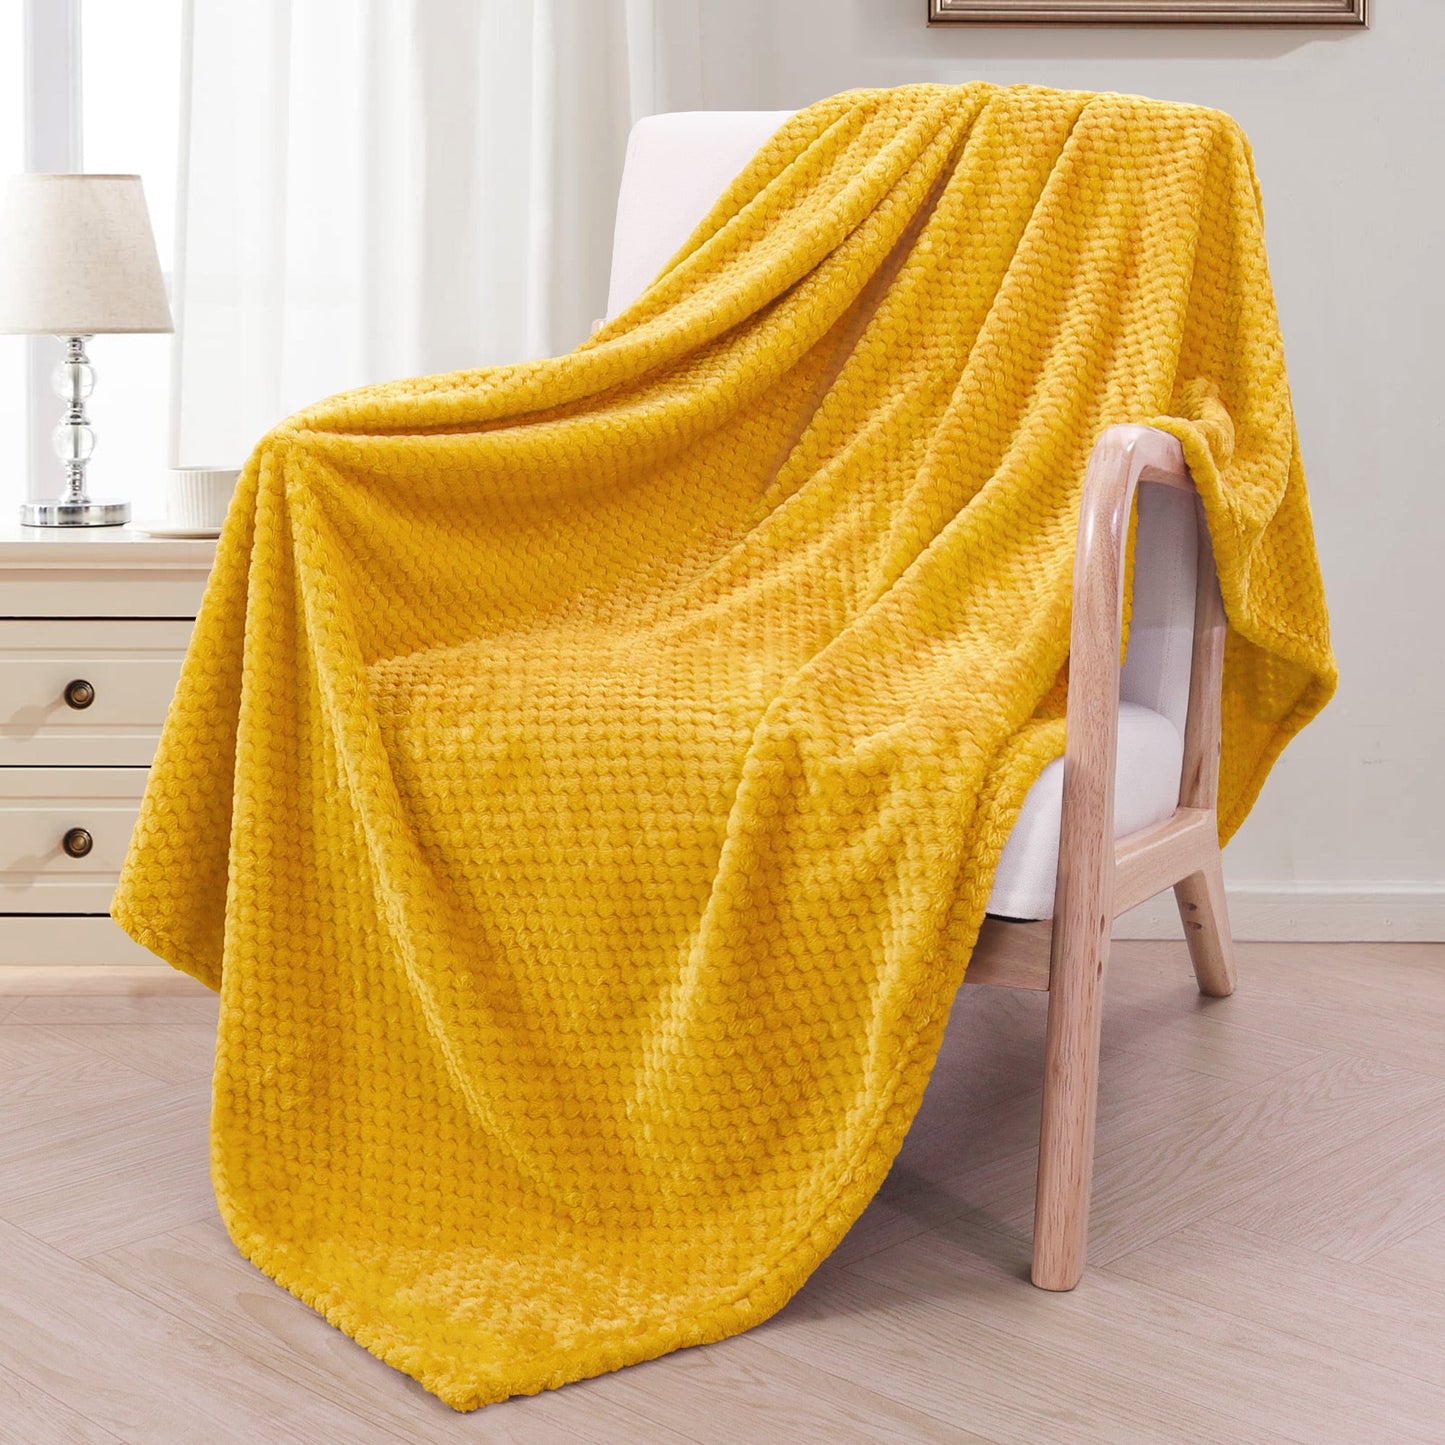 Exclusivo Mezcla Waffle Textured Extra Large Fleece Blanket, Super Soft and Warm Throw Blanket for Couch, Sofa and Bed (Mustard Yellow, 50x70 inches)-Cozy, Fuzzy and Lightweight